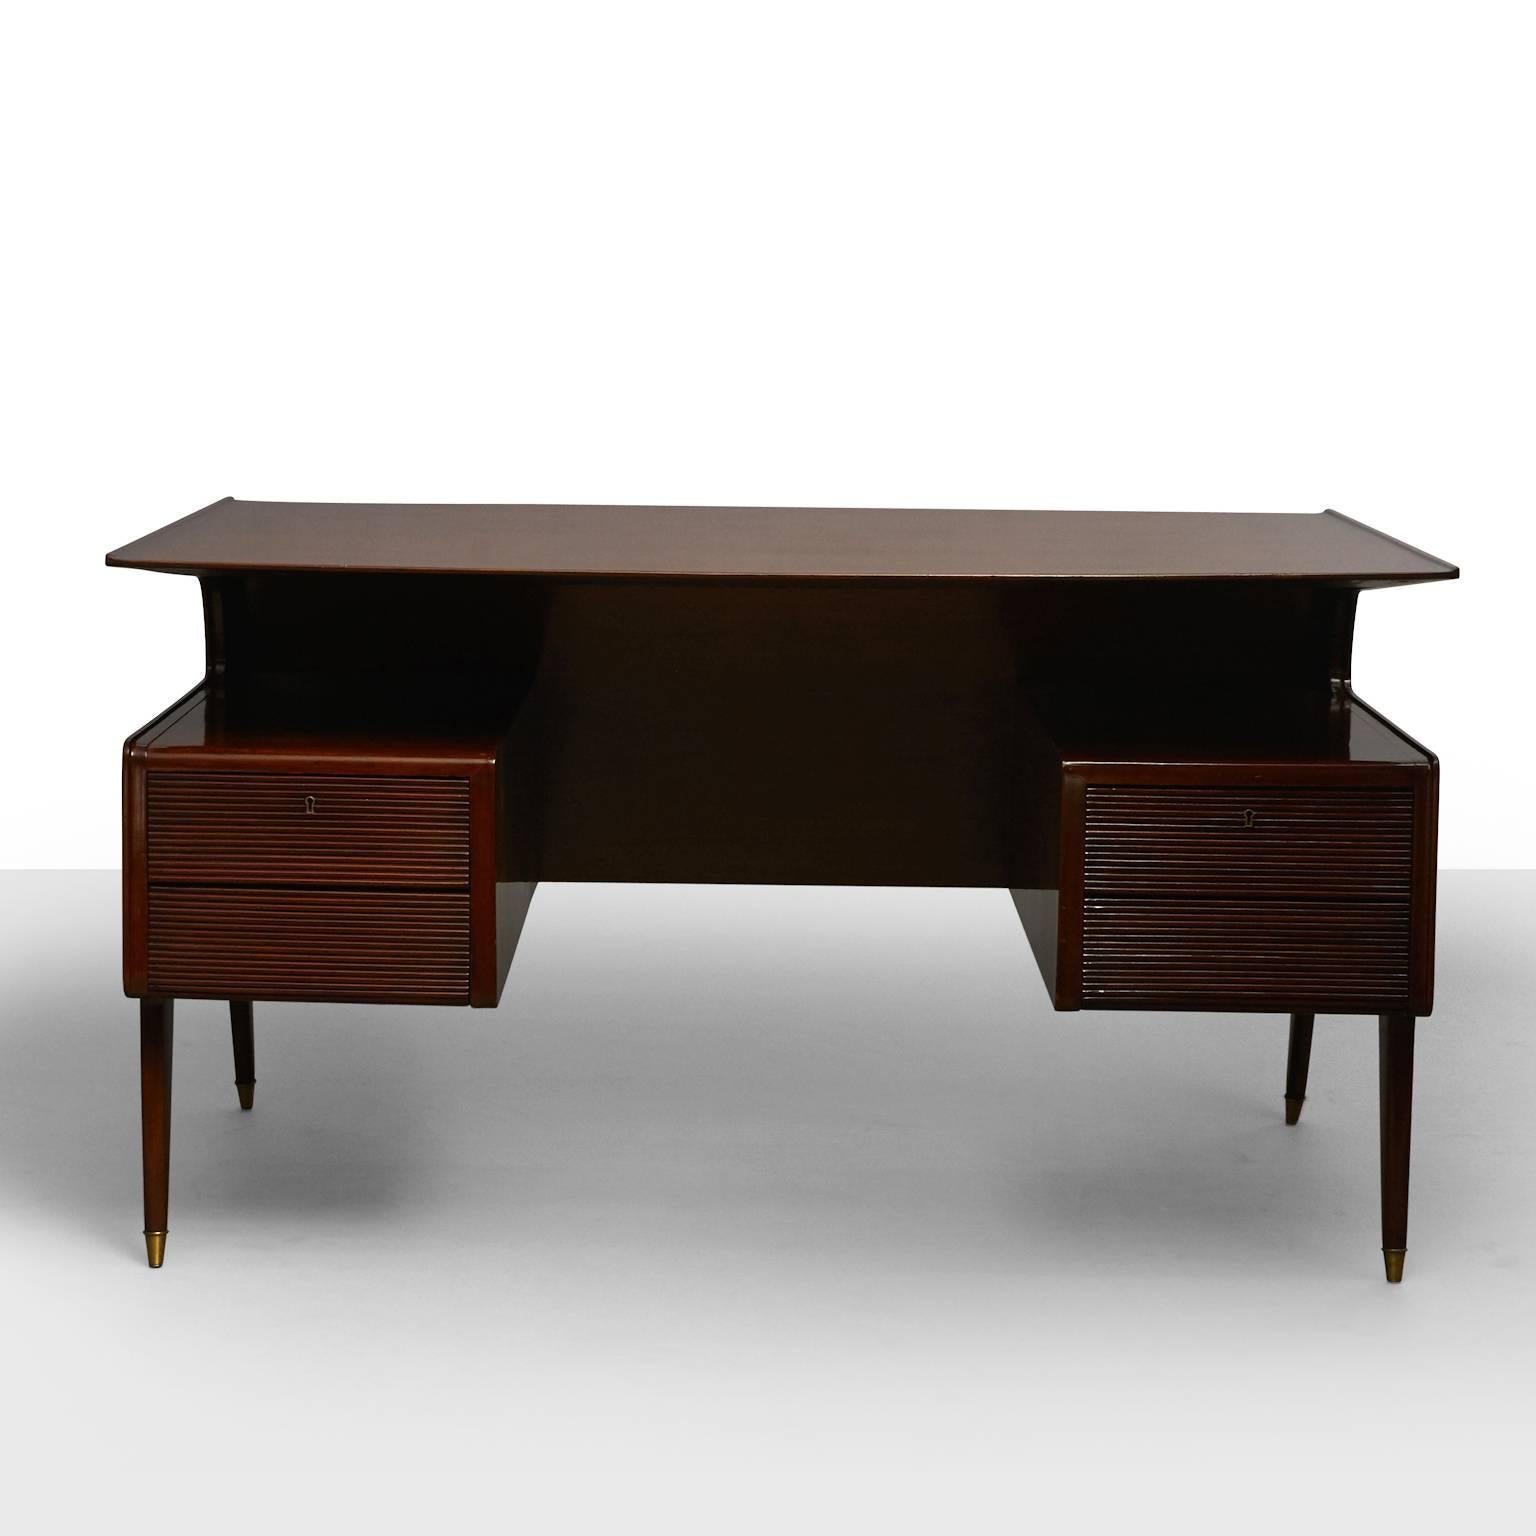 Guglielmo Ulrich style executive desk, possibly made by Dassi
An elegant Executive desk of lacquered palisander and brass. Features
four drawers, cantilevered top and brass details on tapered legs,
Italy, circa 1950s.
  